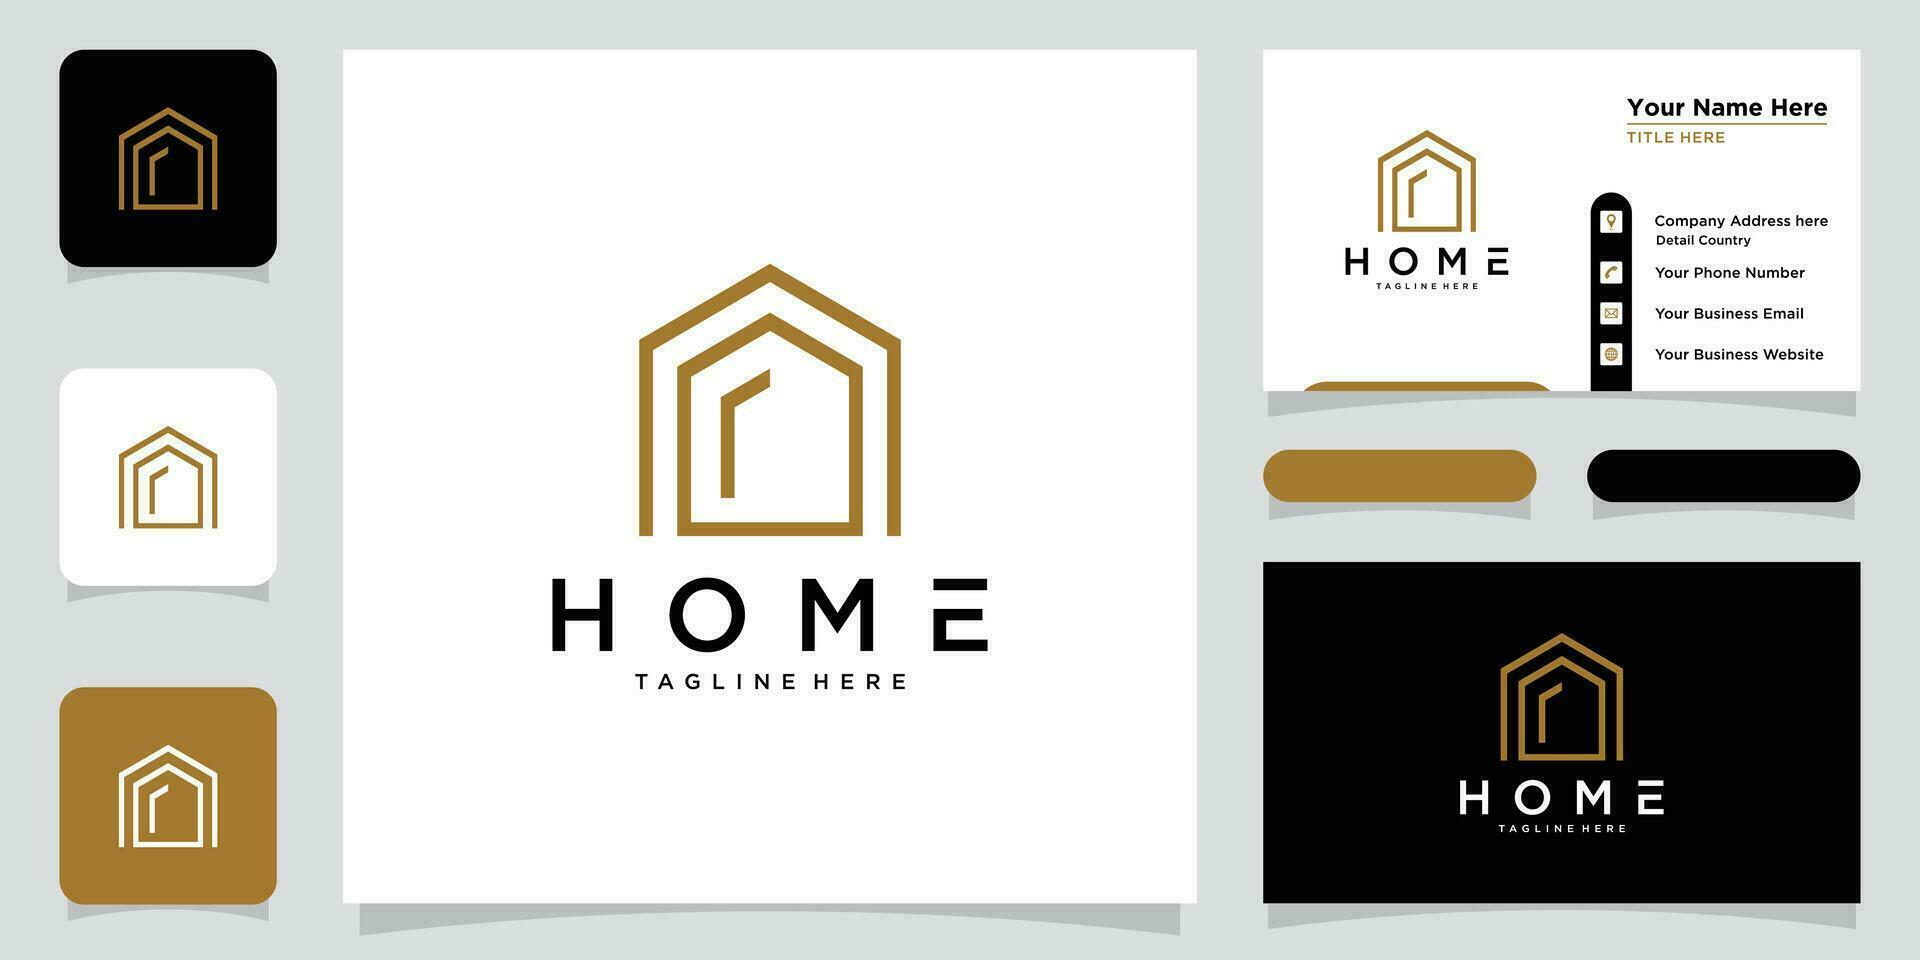 Home logo design real estate construction architecture and building logos with business card design Premium Vector